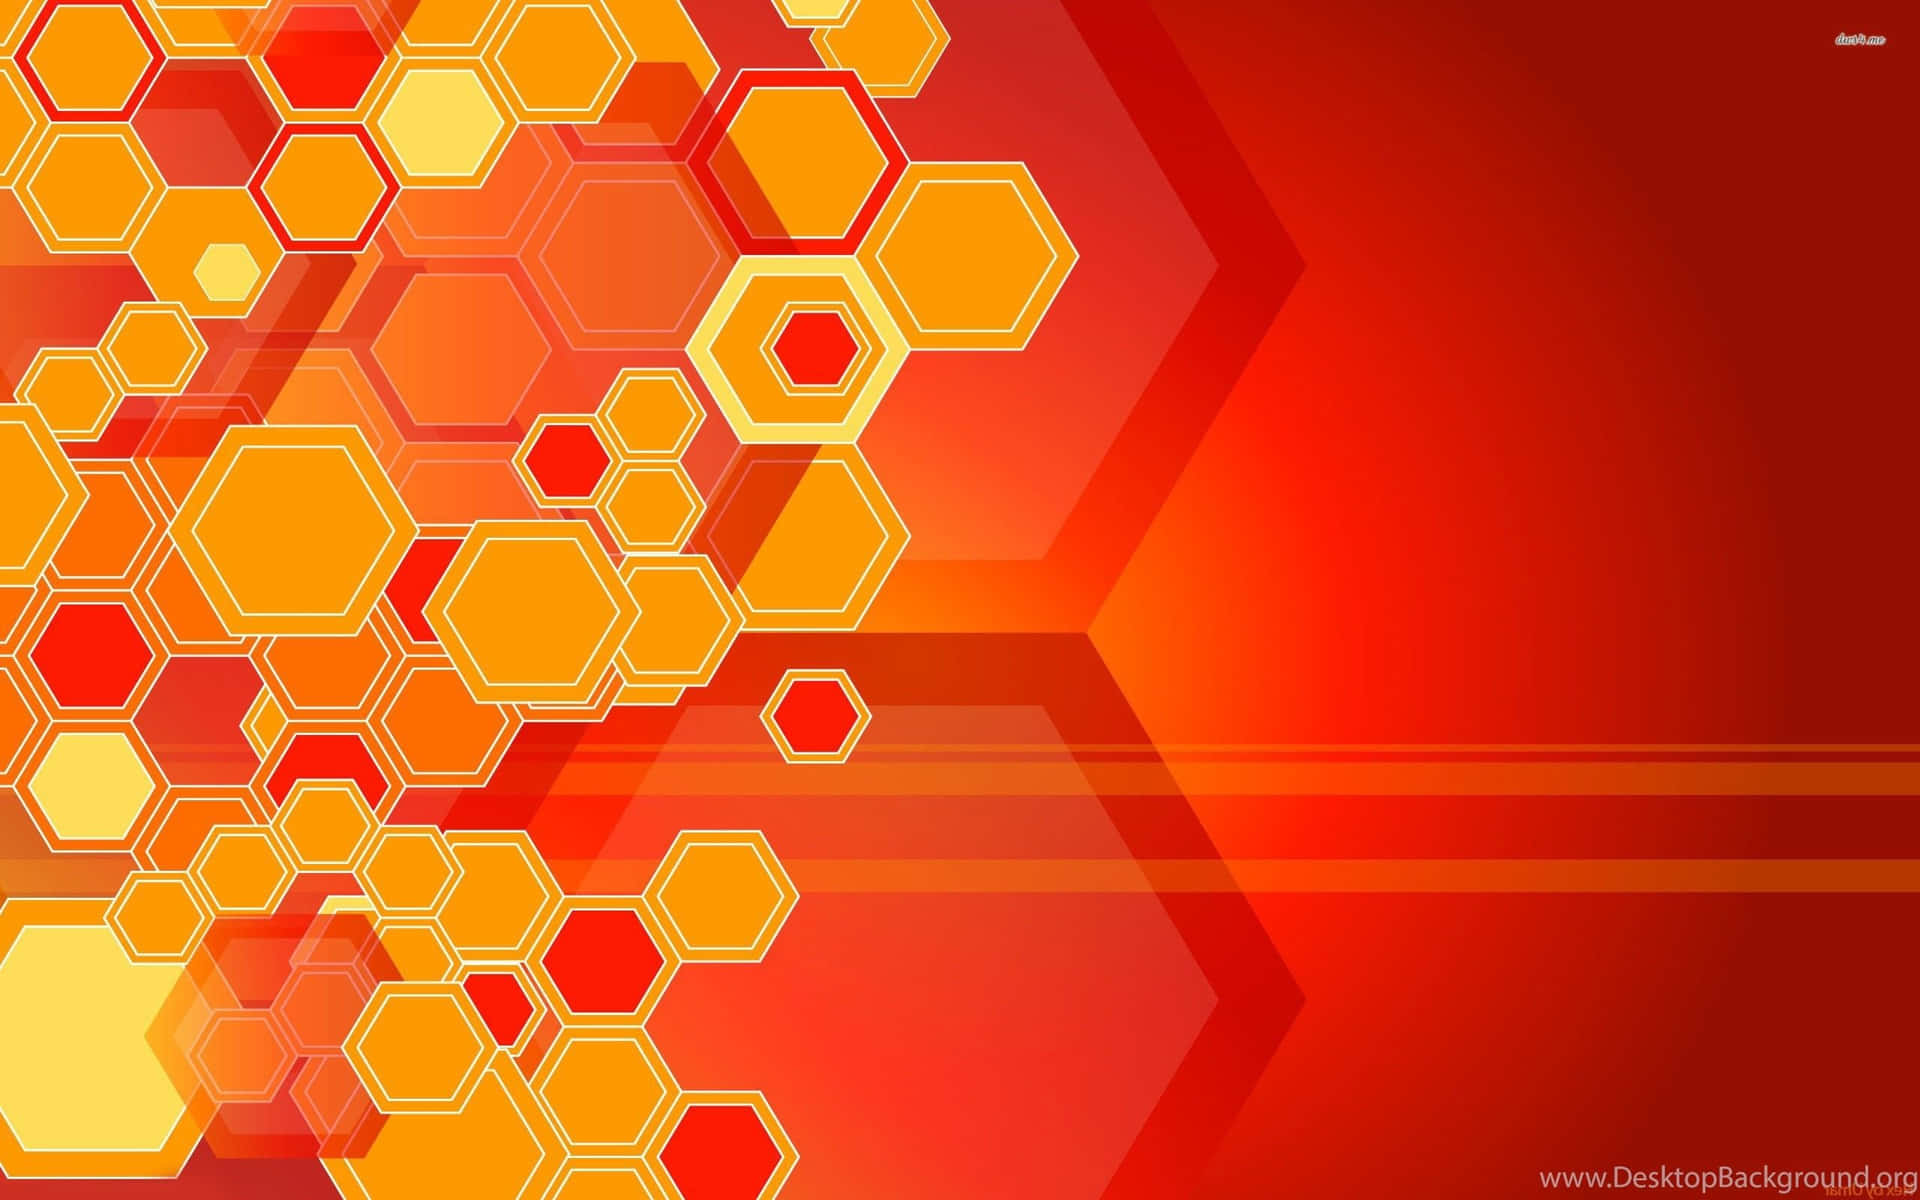 Bright and Bold Red and Orange Wallpaper